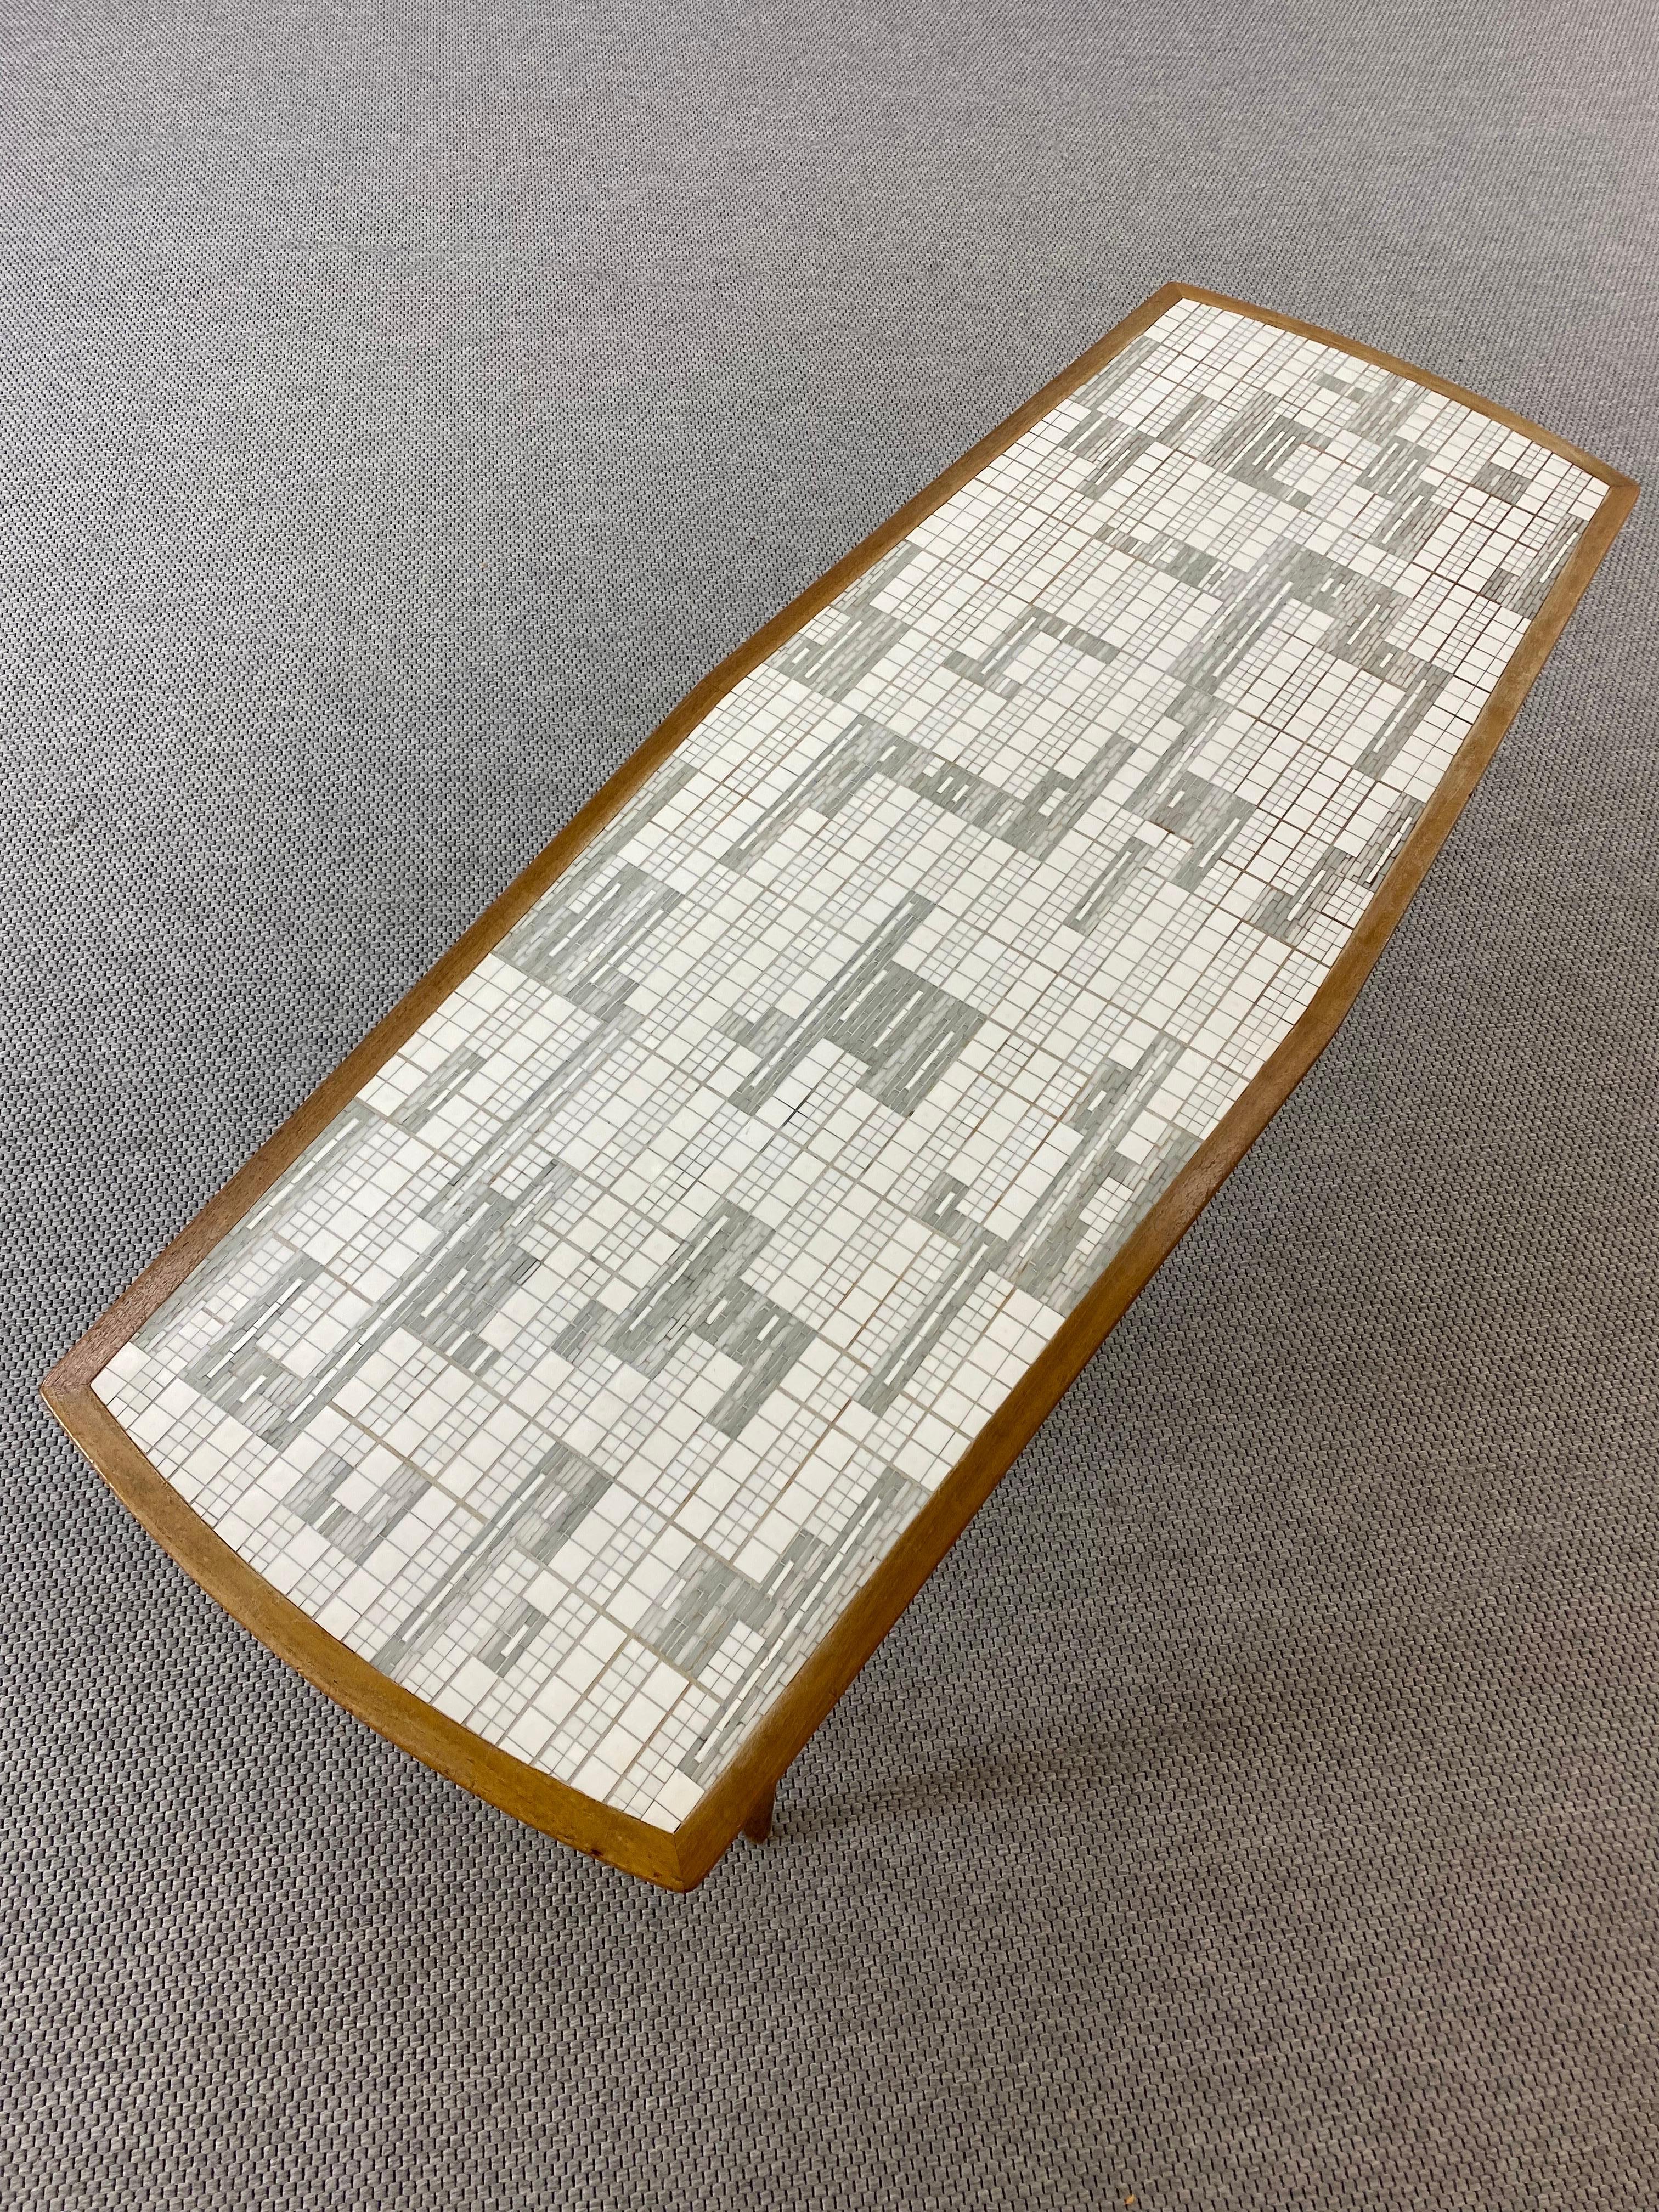 Midcentury 50s Mosaic and Wood Coffee table by Berthold Müller-Oerlinghausen For Sale 5